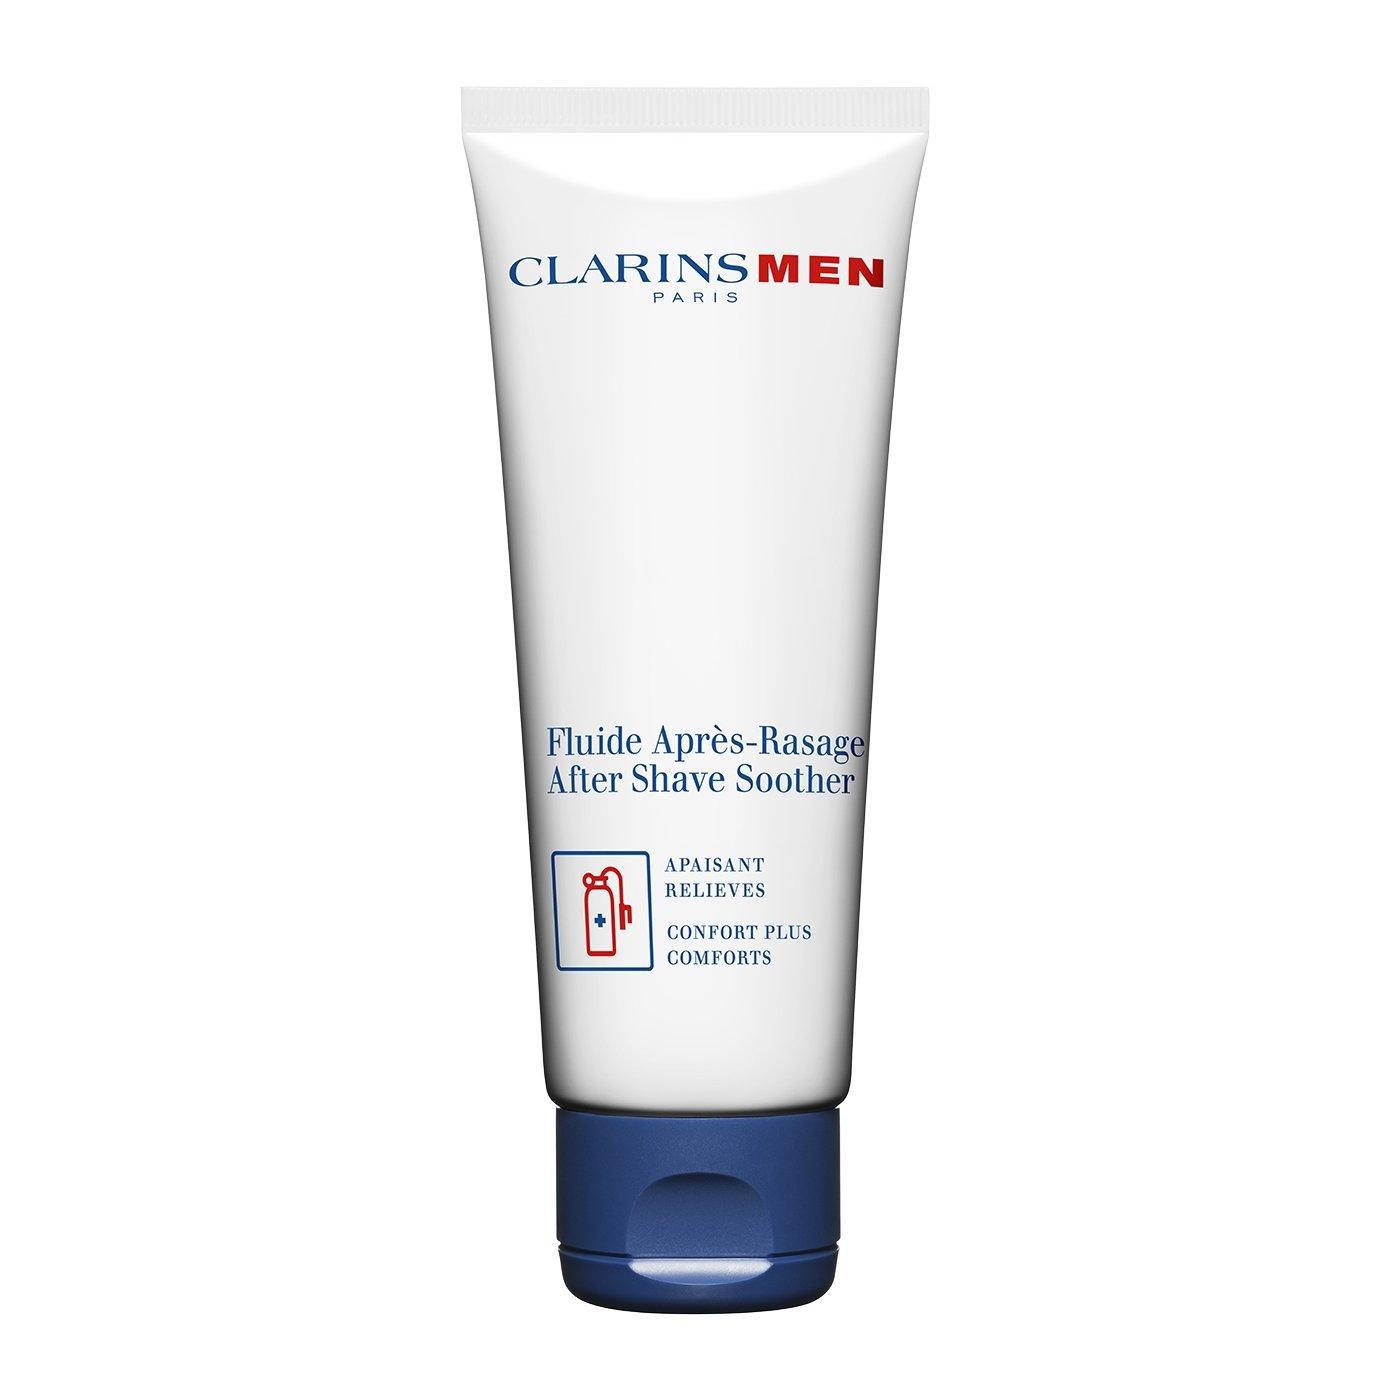 Clarins ClarinsMen After Shave Soother 75ml